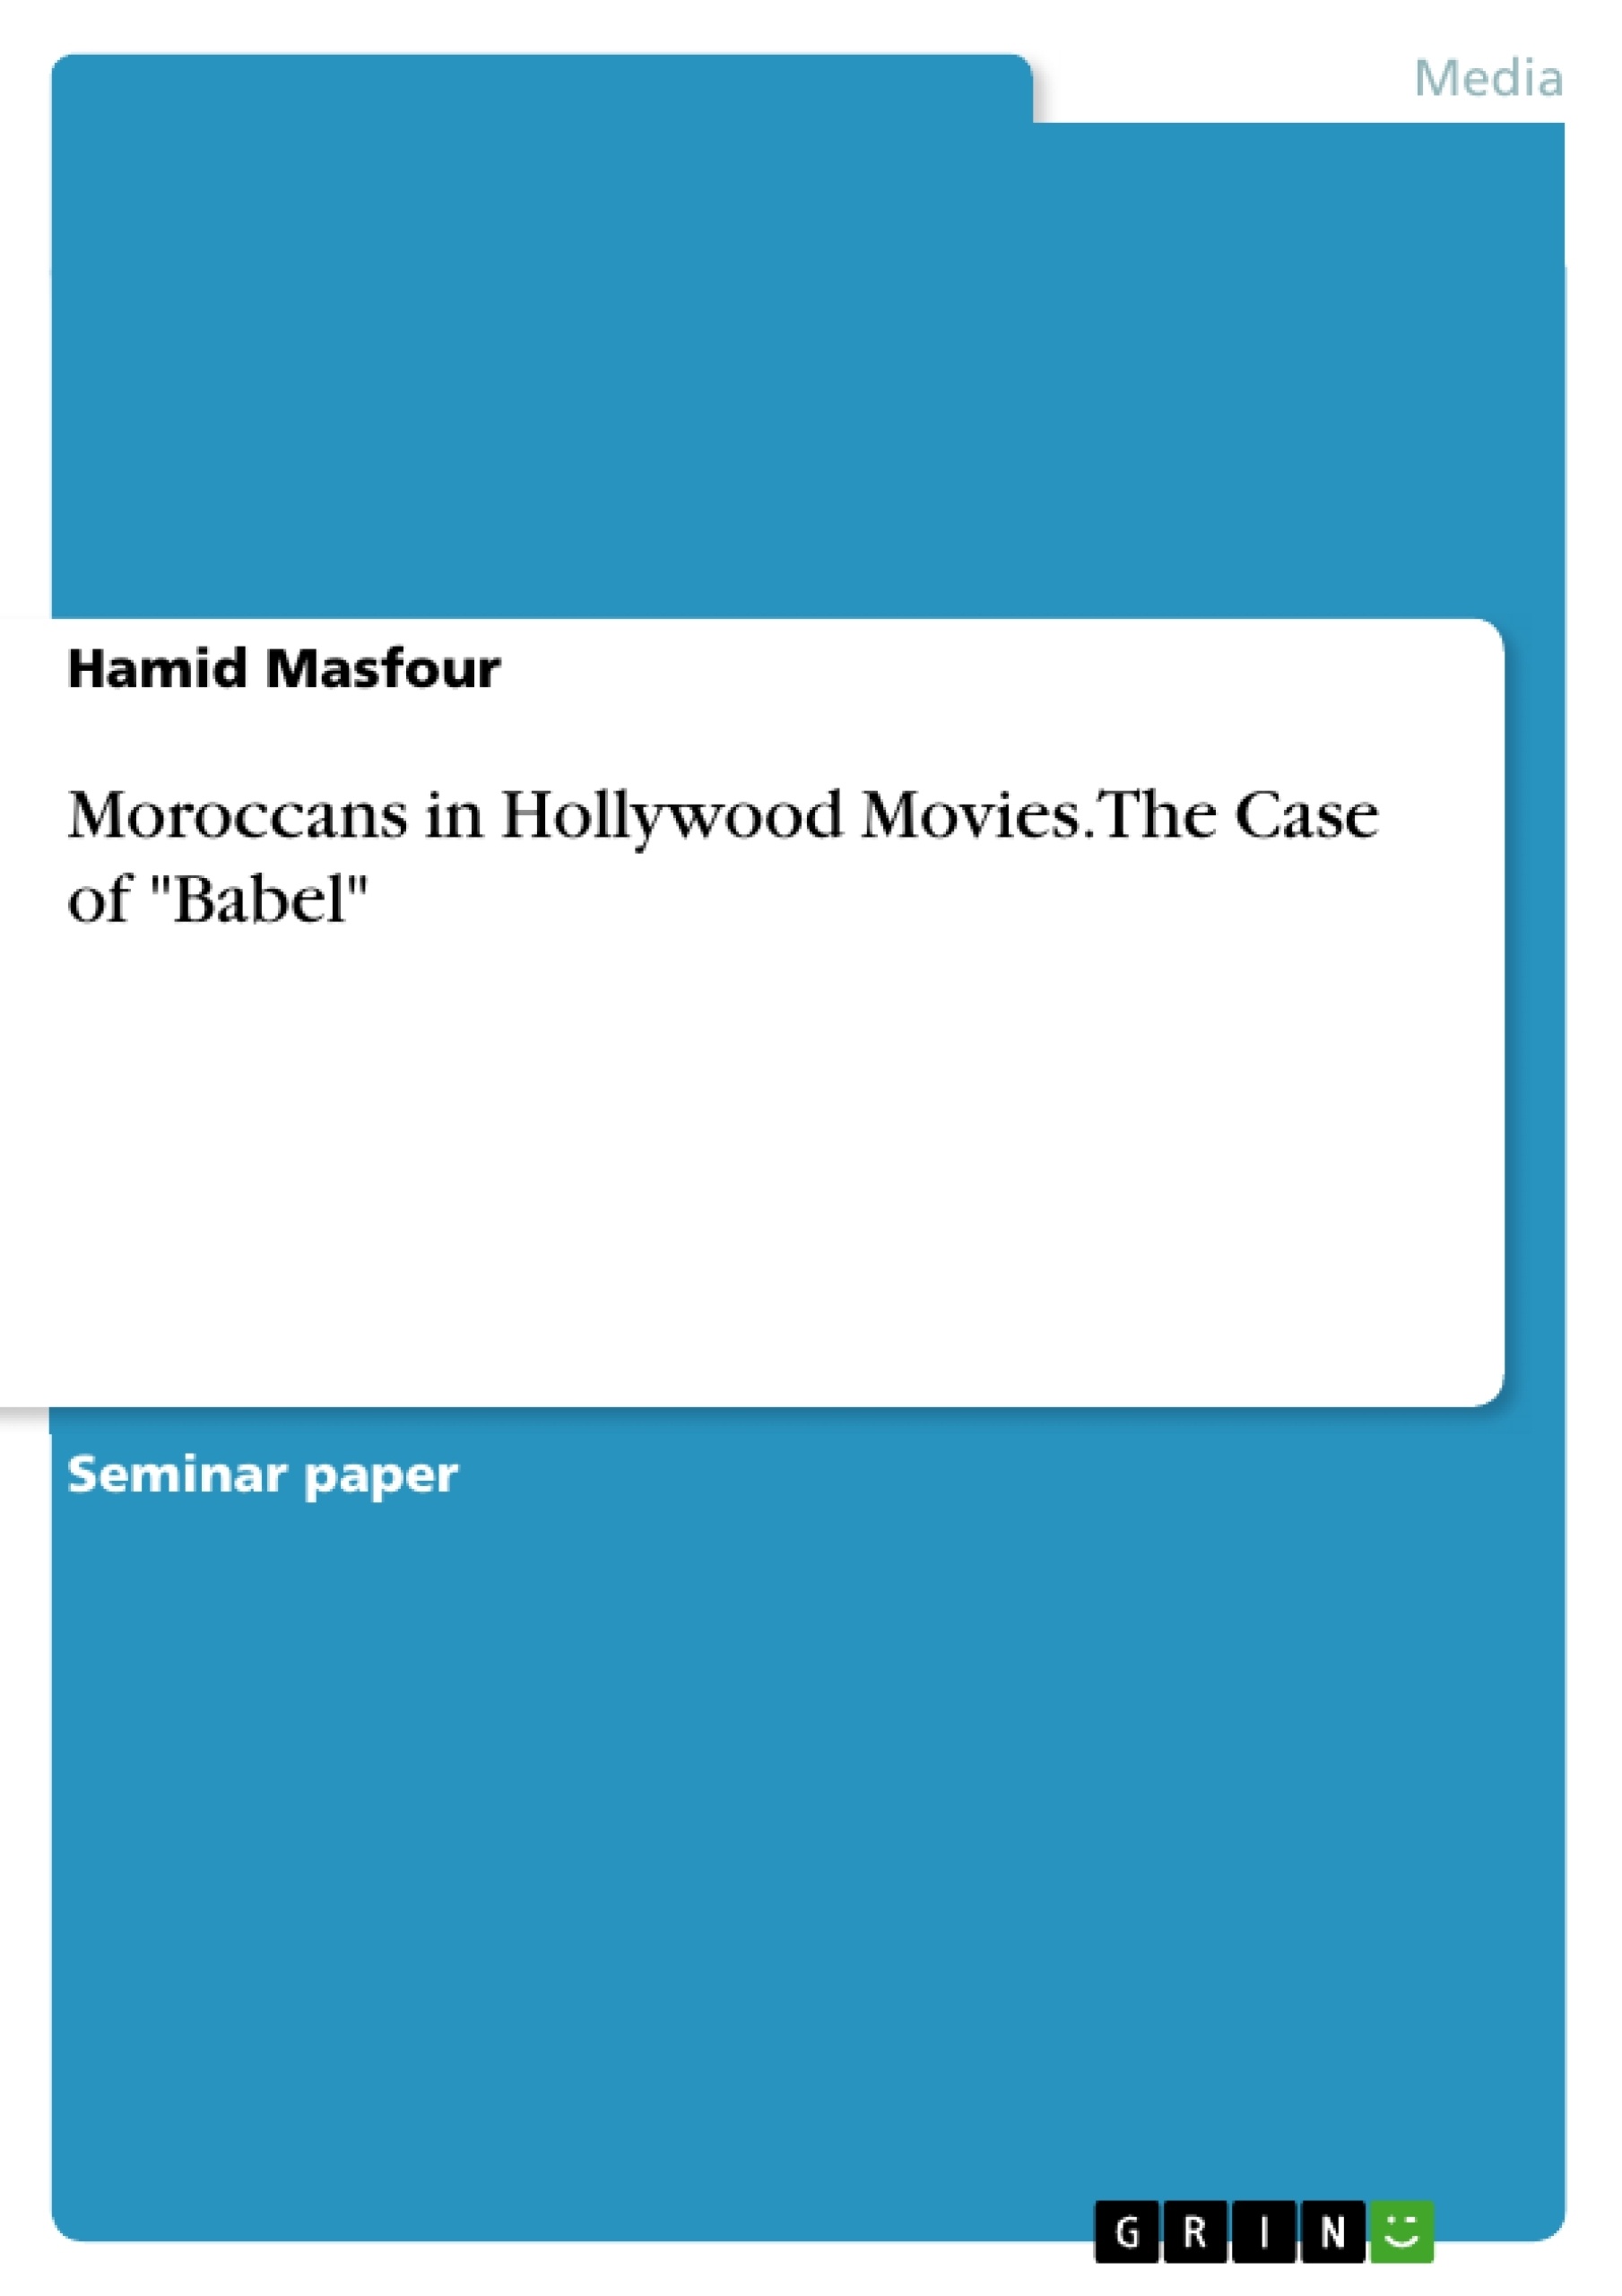 Title: Moroccans in Hollywood Movies. The Case of "Babel"